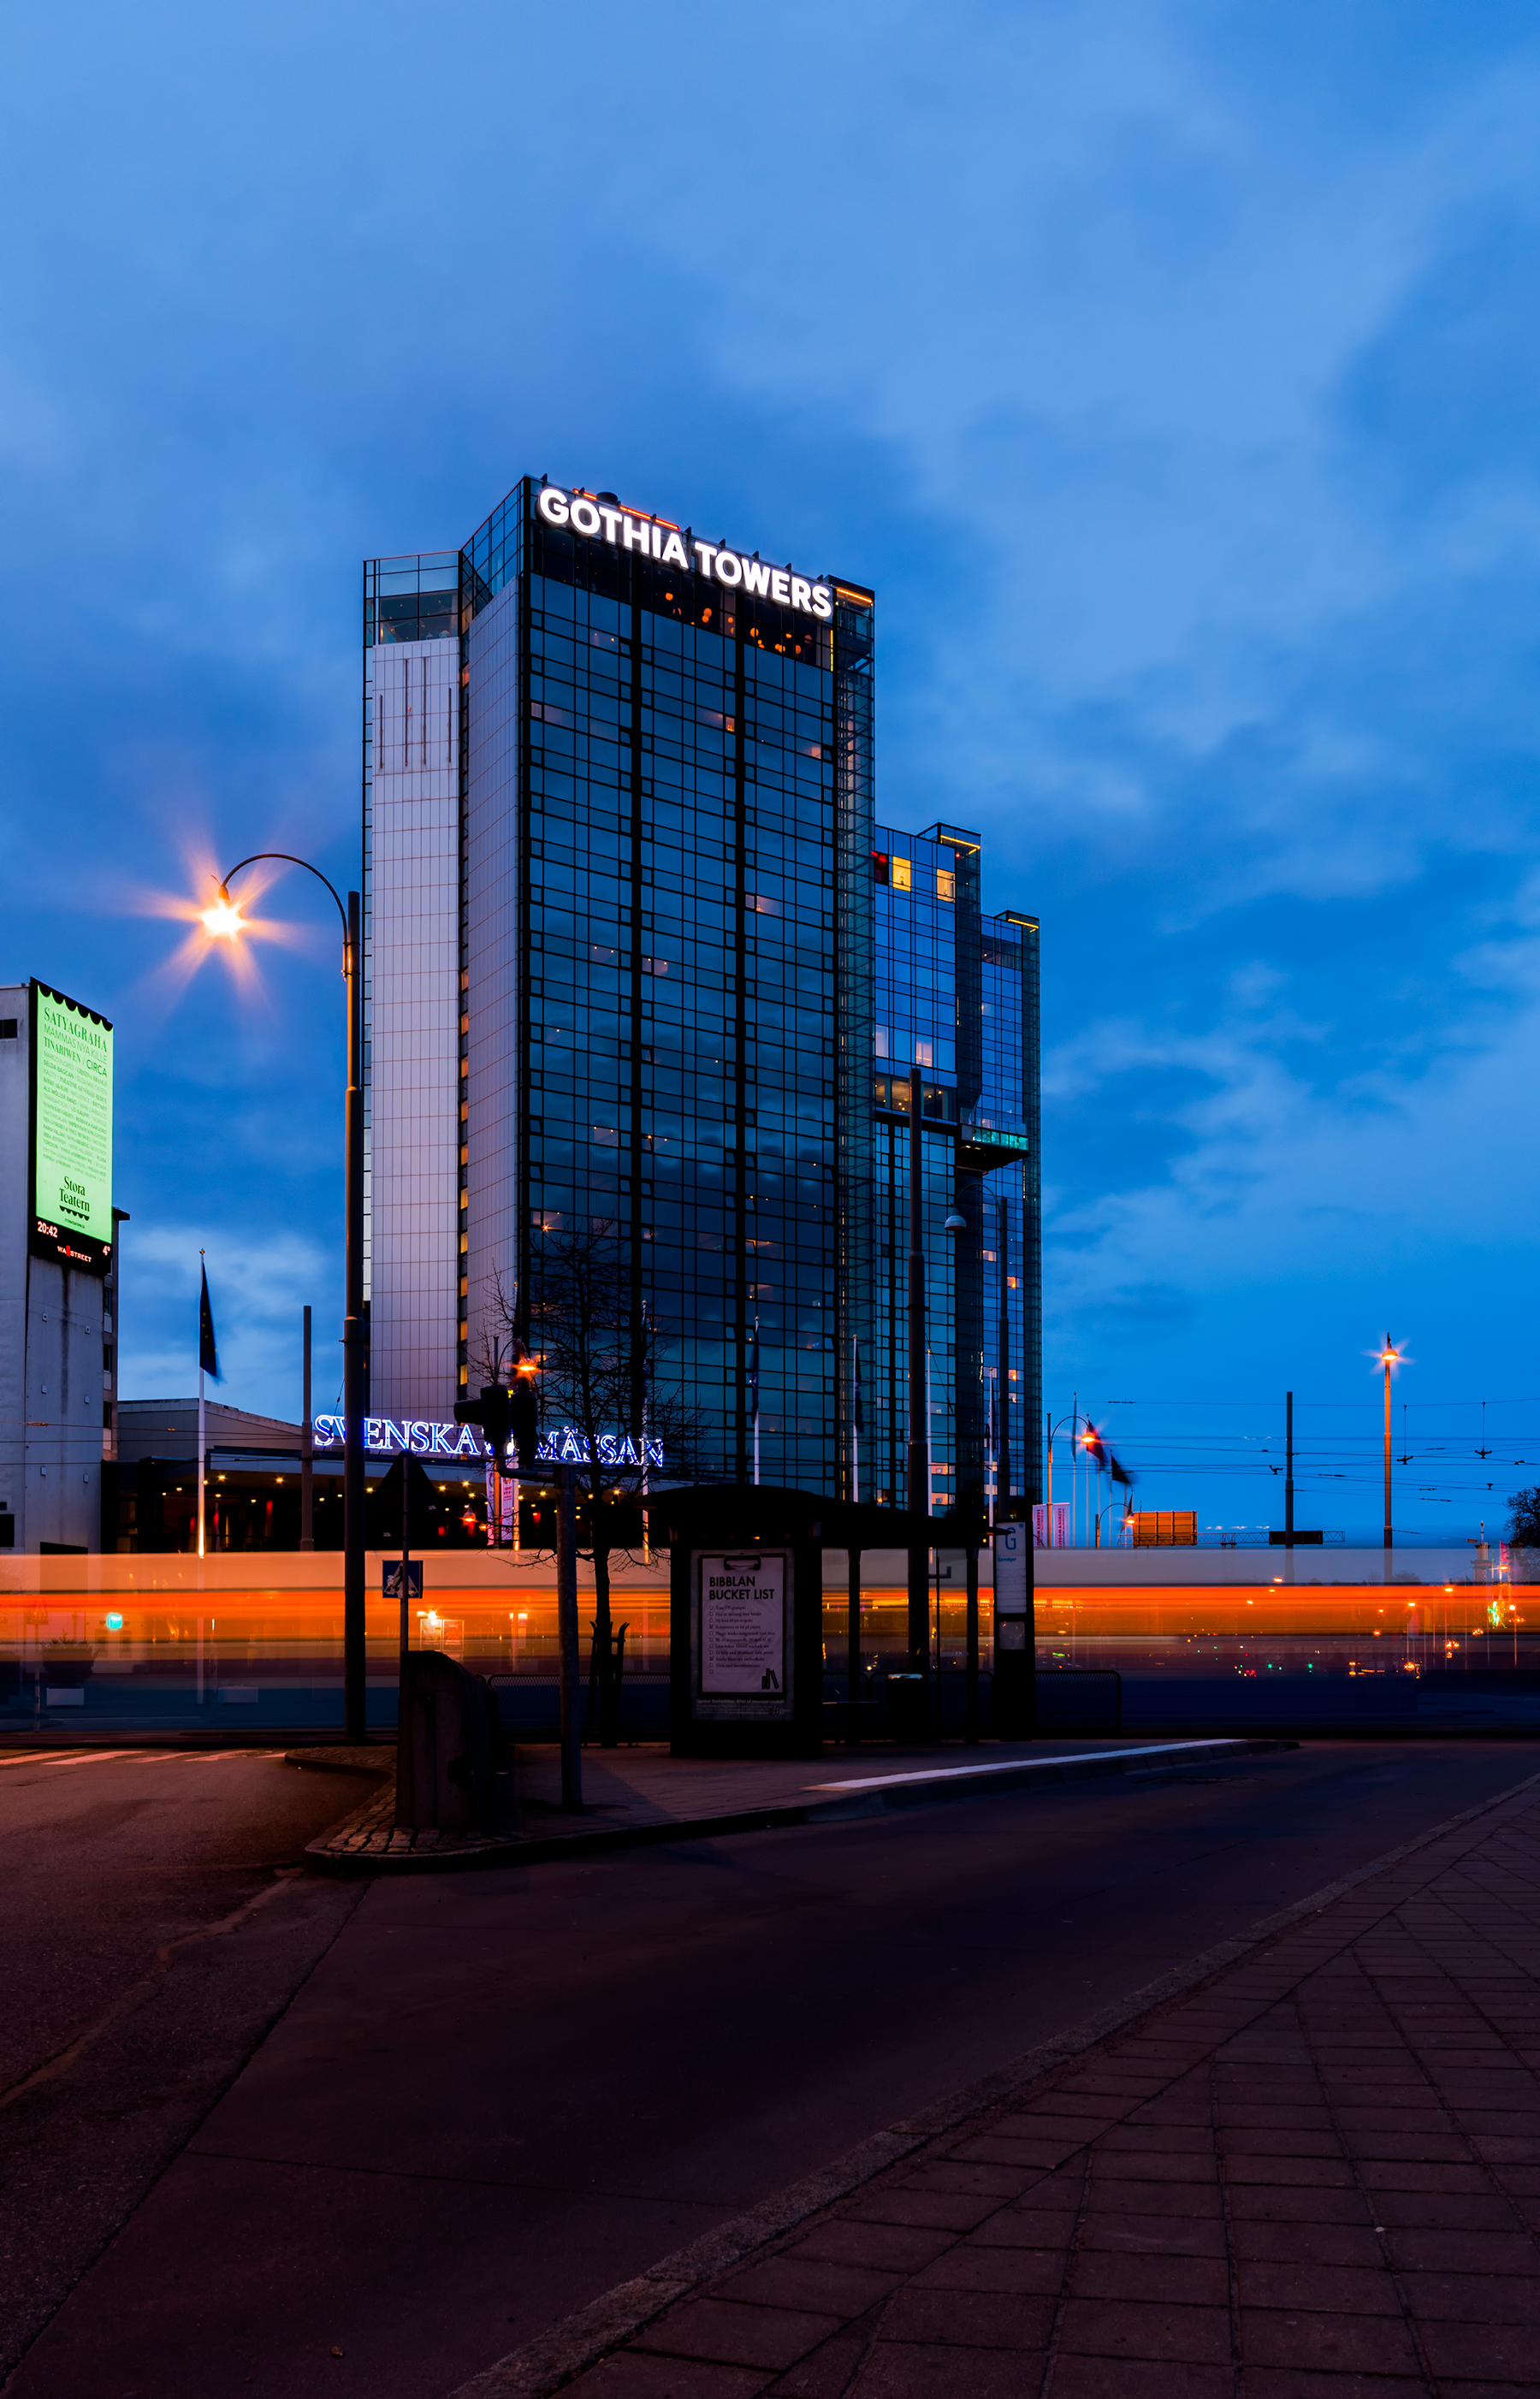 Gothia Towers/The Swedish Exhibition & Congress Centre